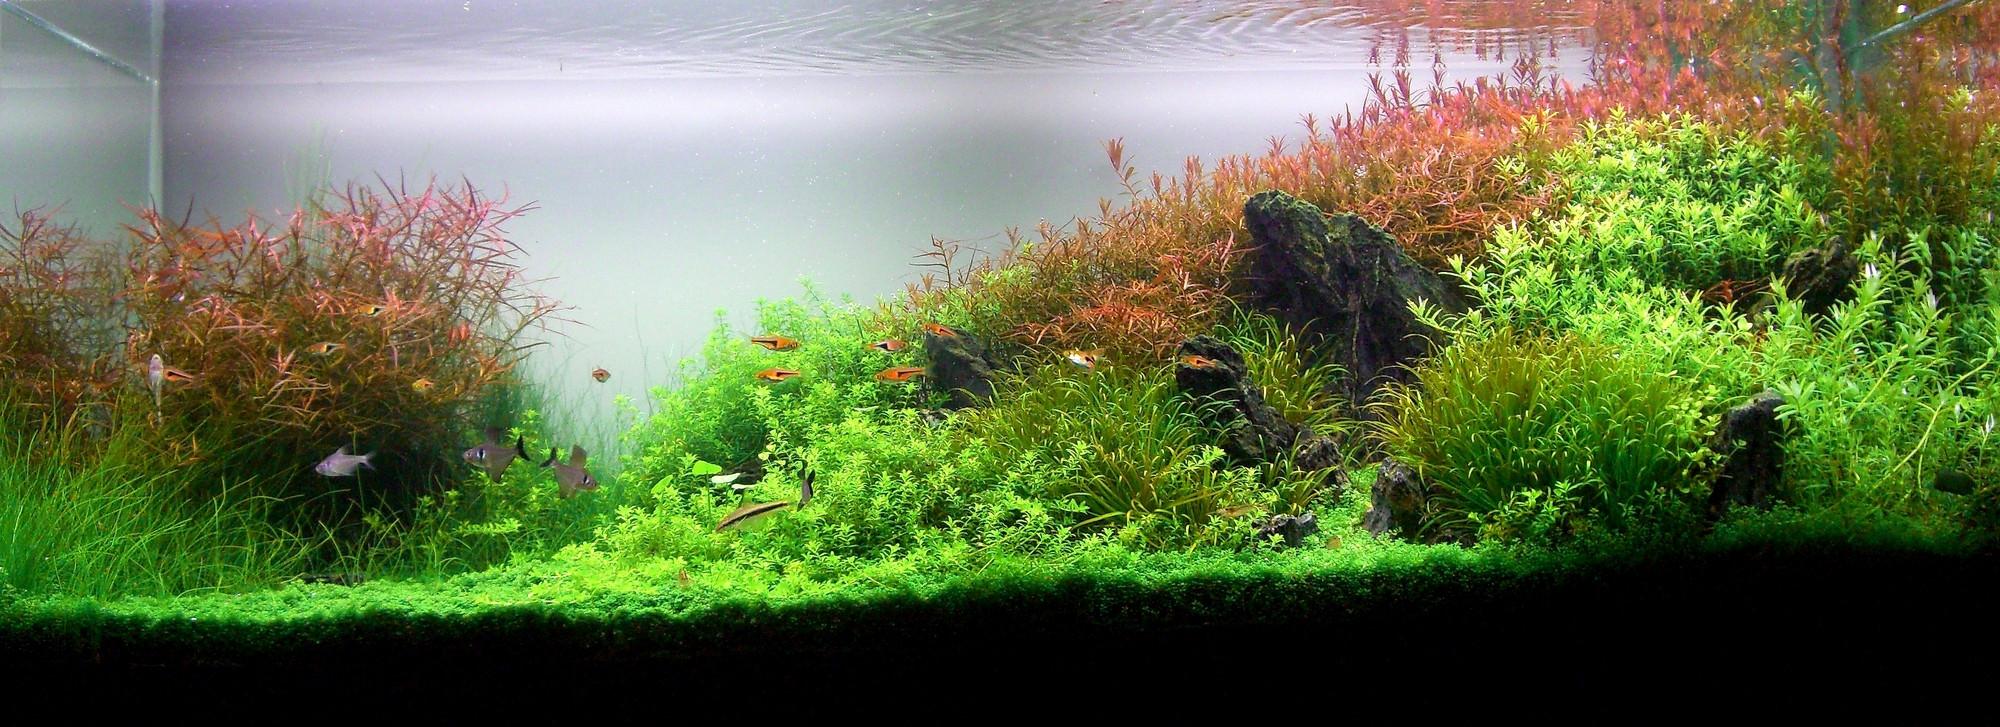 AquaScaping World Magazine with Nicolas Guillermin